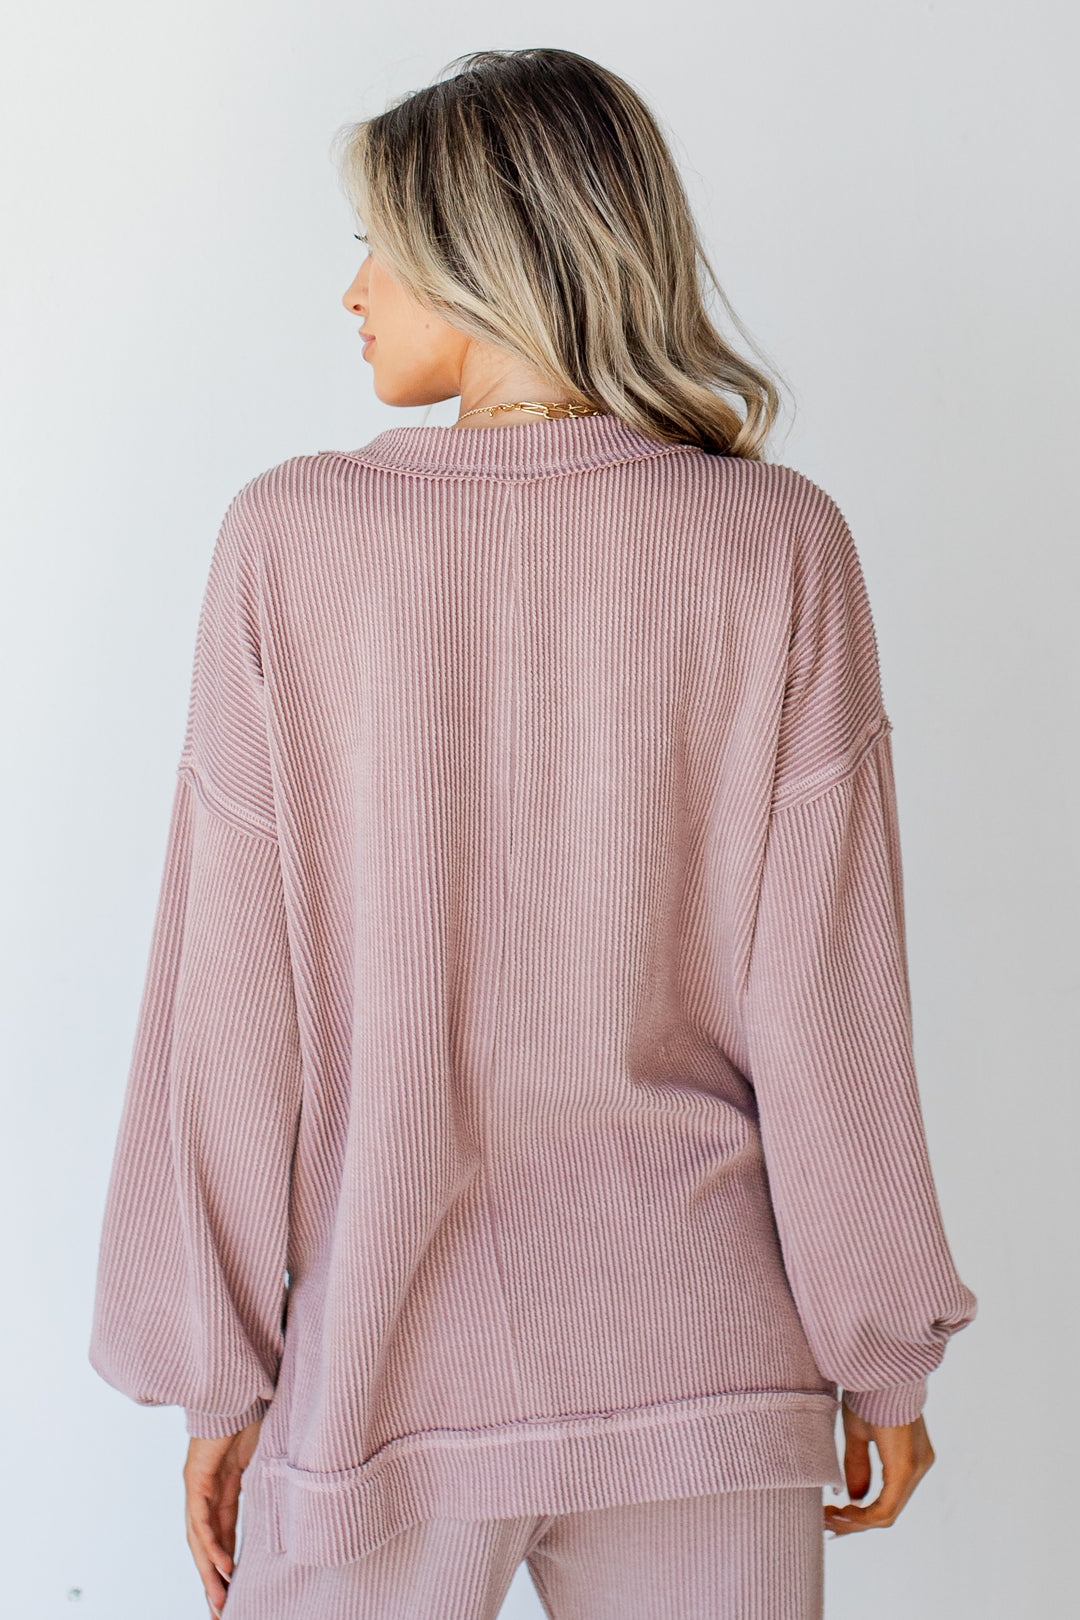 Corded Pullover in blush back view